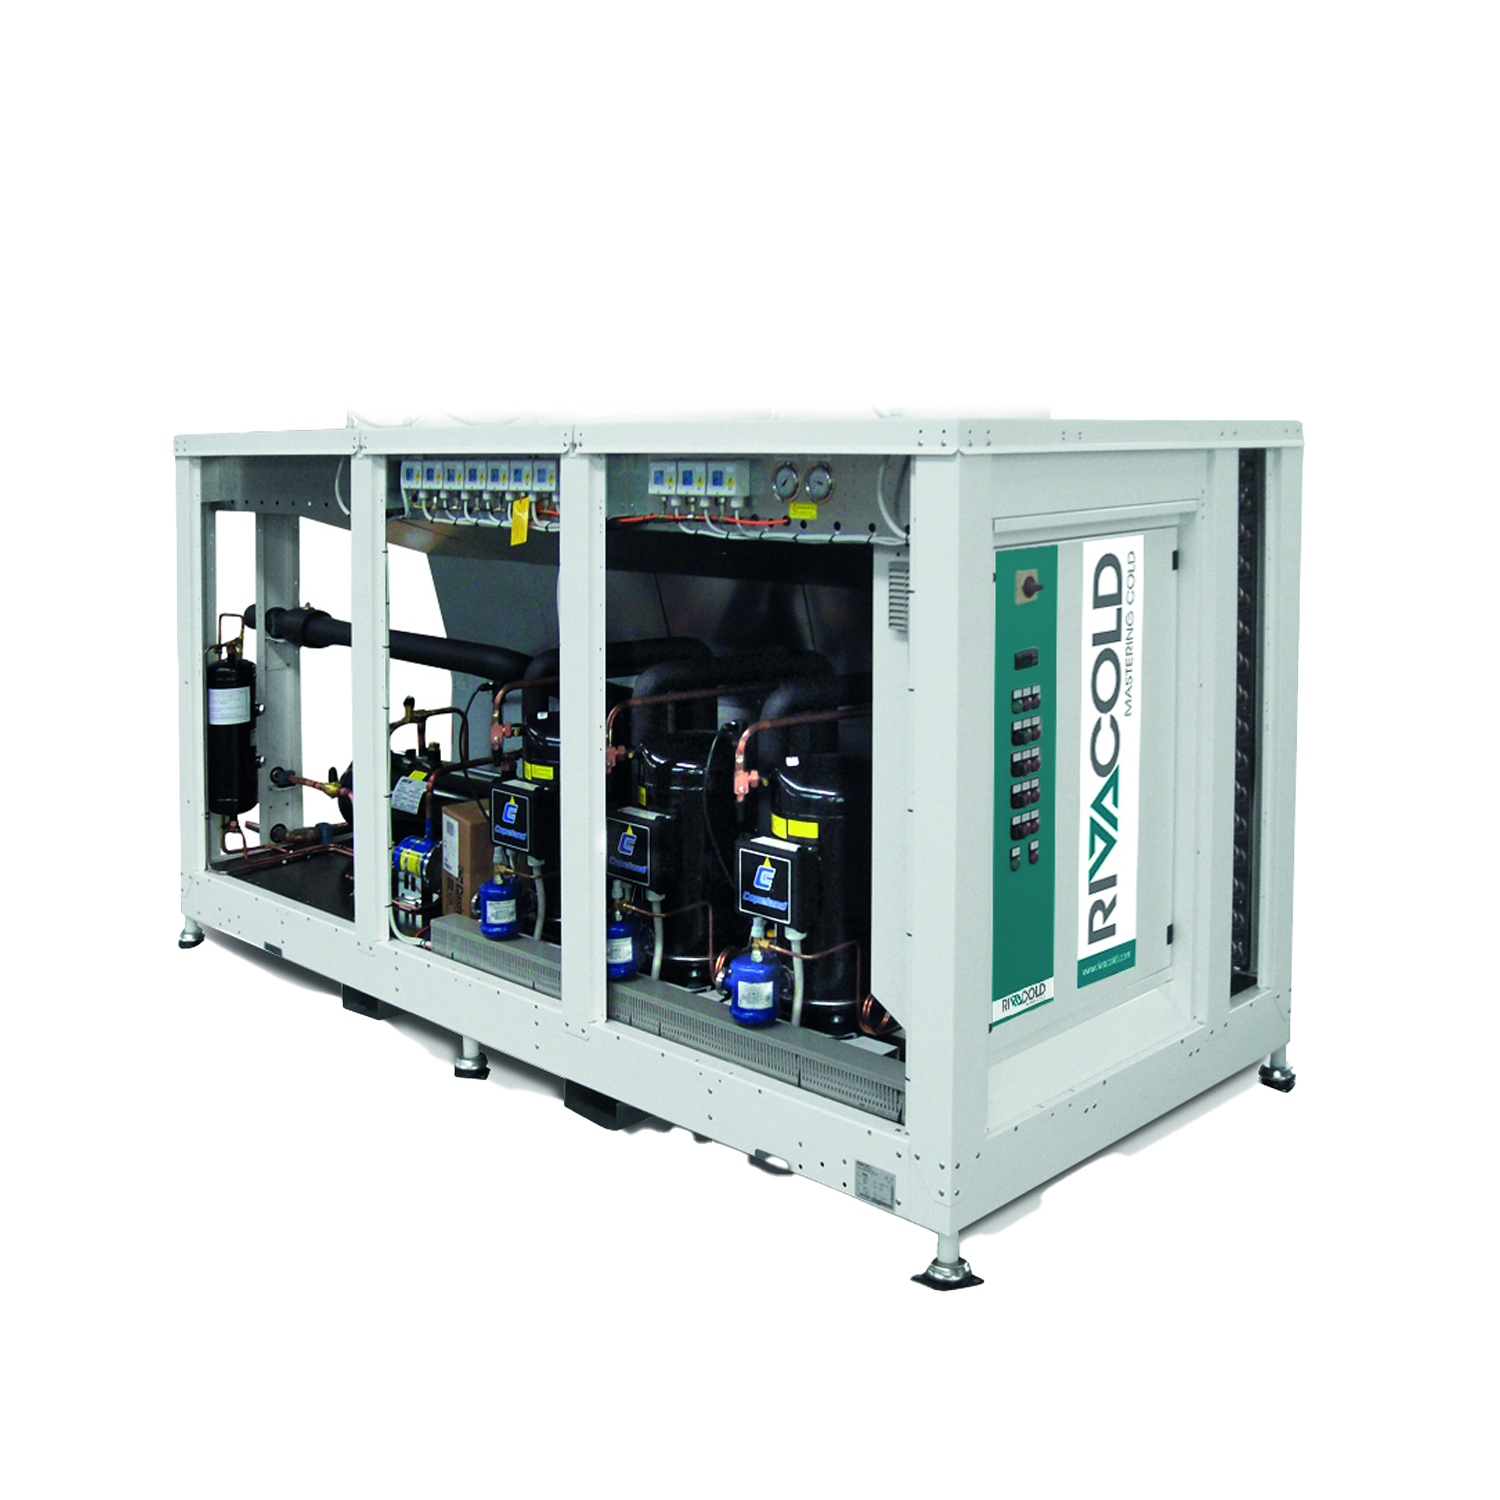 CX-C: Multi Compressor Packs NK/TK with 3 x Copeland scroll compressors, without condenser – R134a/R513A/R449A